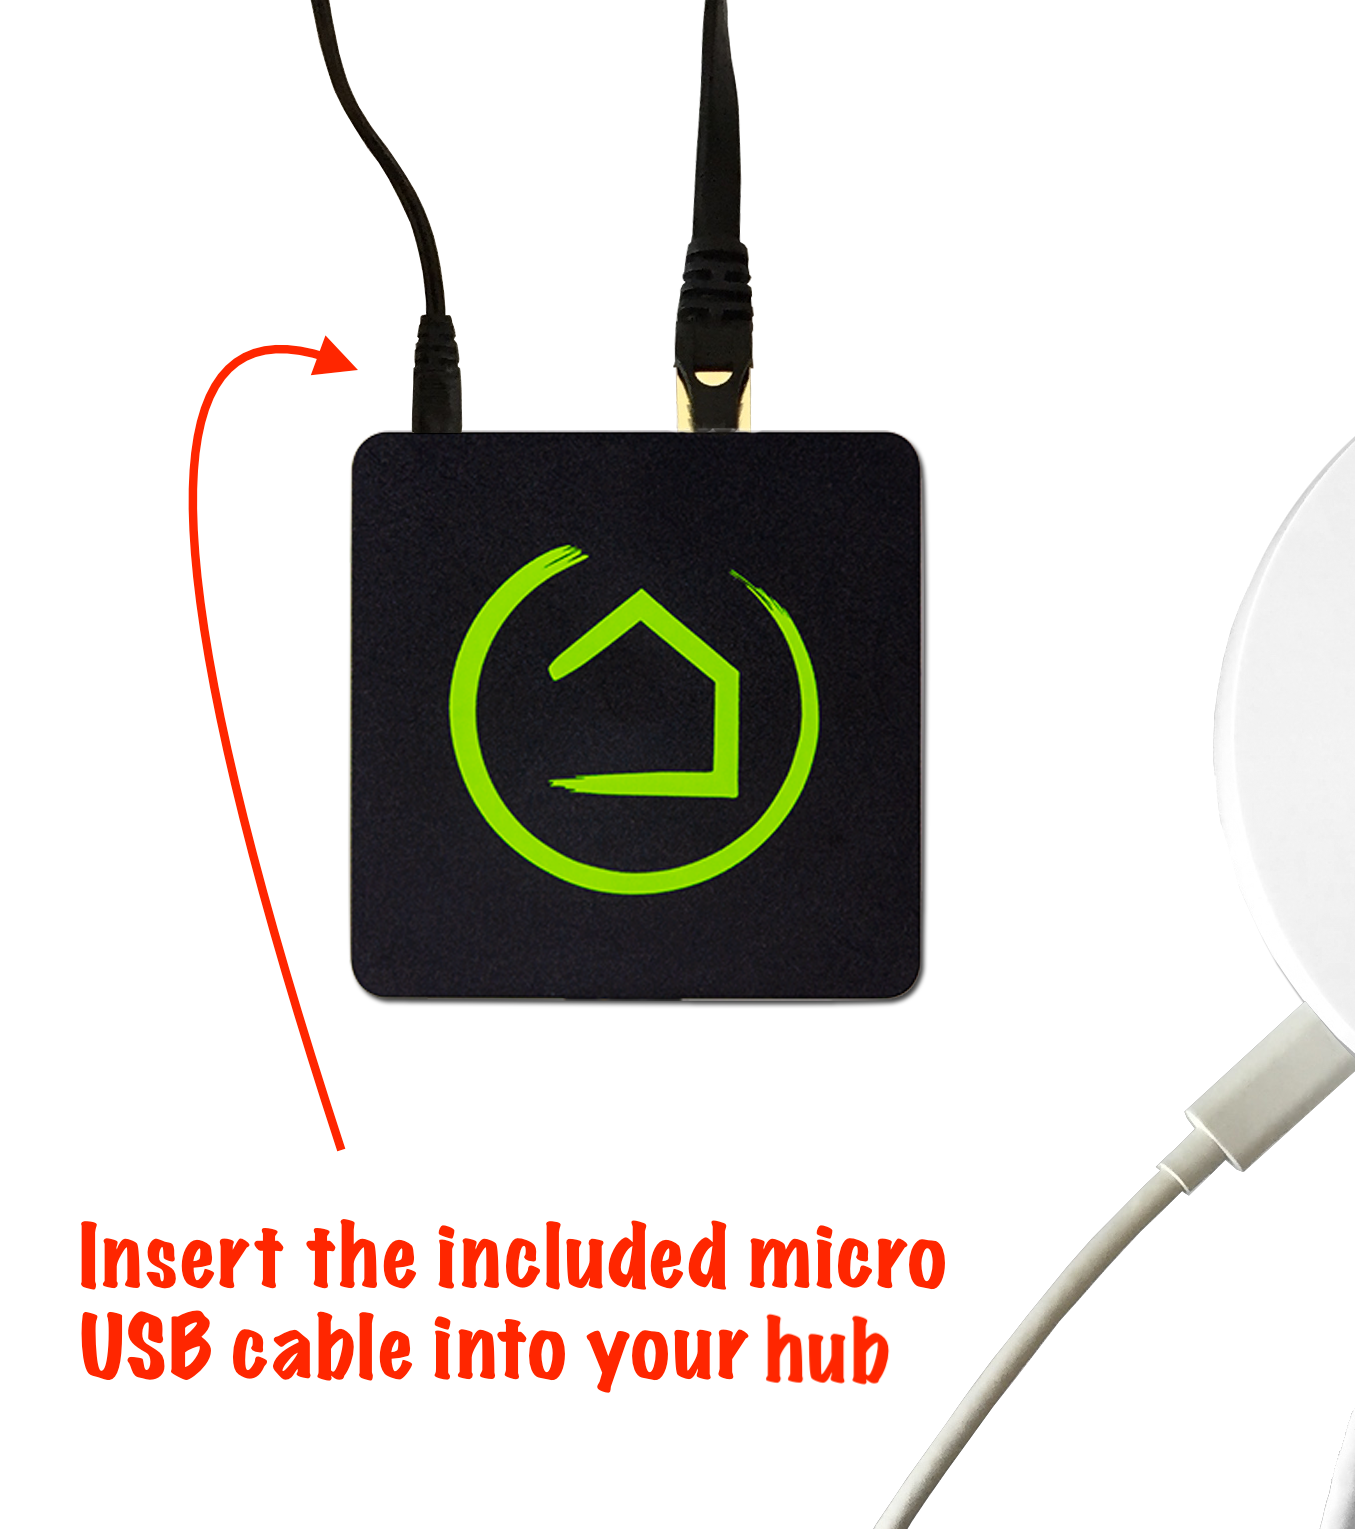 Insert the included micro USB cable into your hub, being careful not to put stress on the internal connector in the hub